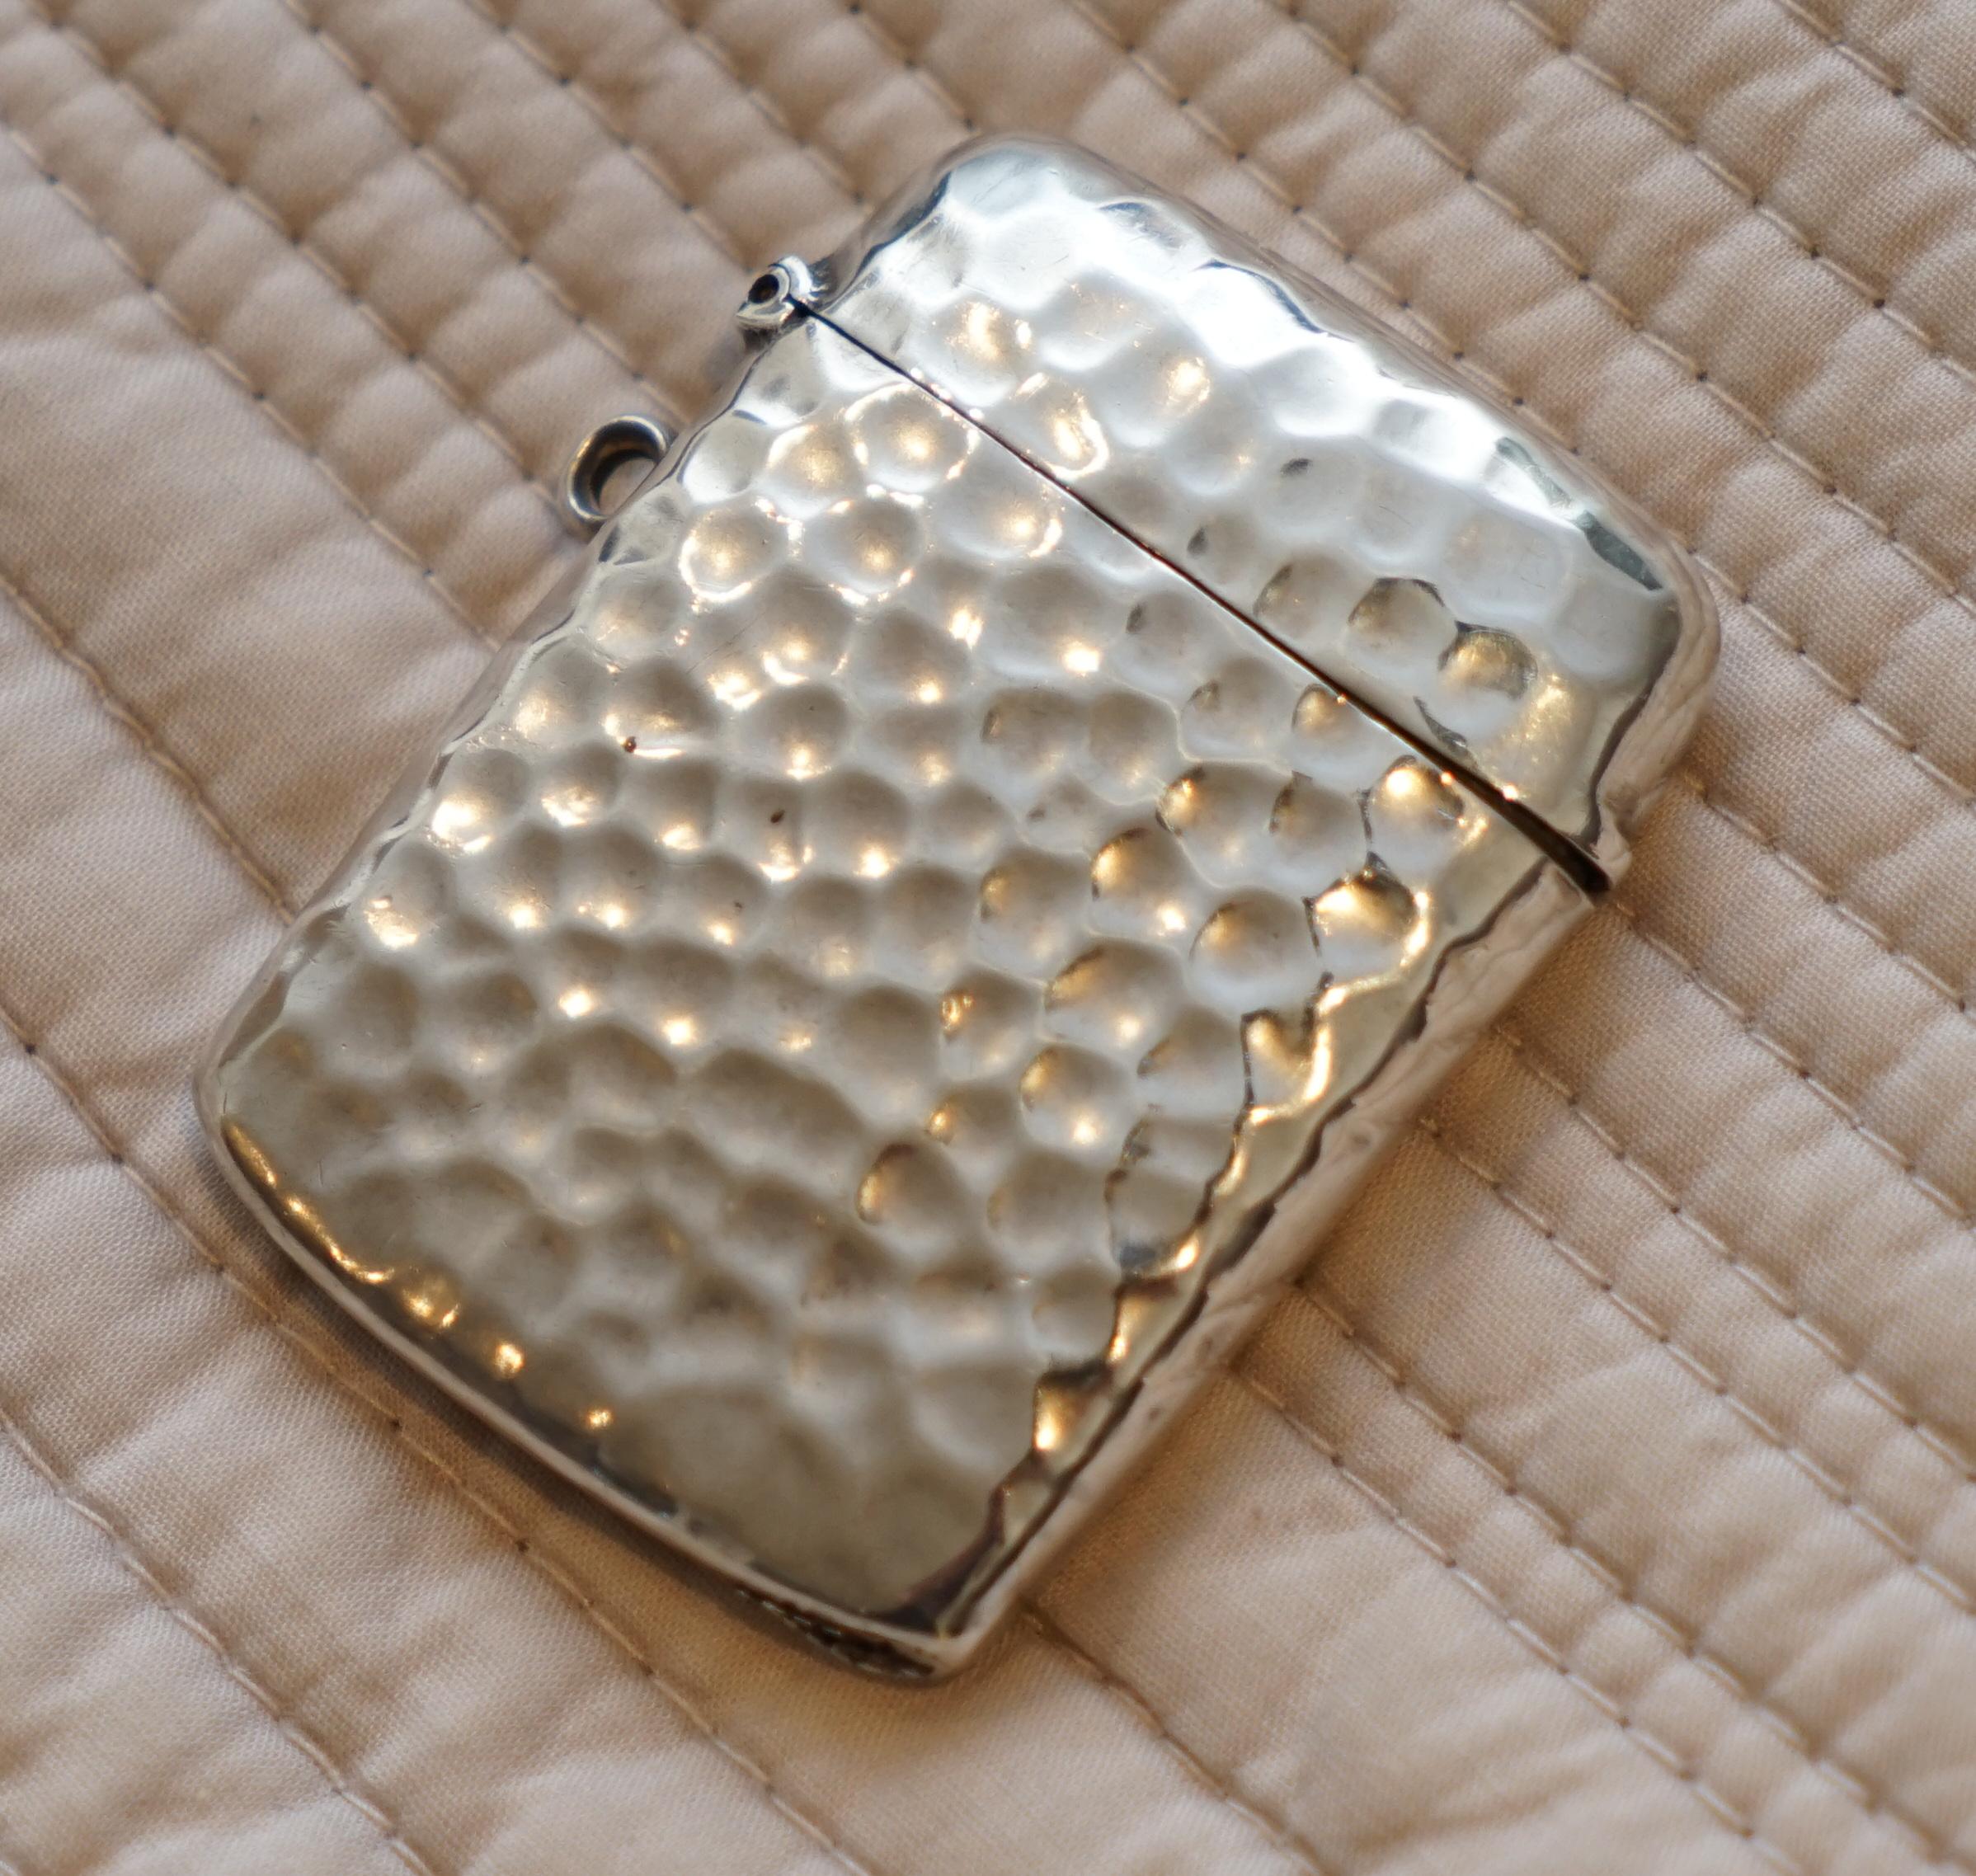 We are delighted to offer for sale this stunning very rare Liberty London 1899 hand hammered solid sterling vesta case made by William Hair Haseler

A very good looking decorative piece, its hand-hammered hence the lovely tactile finish, it opens